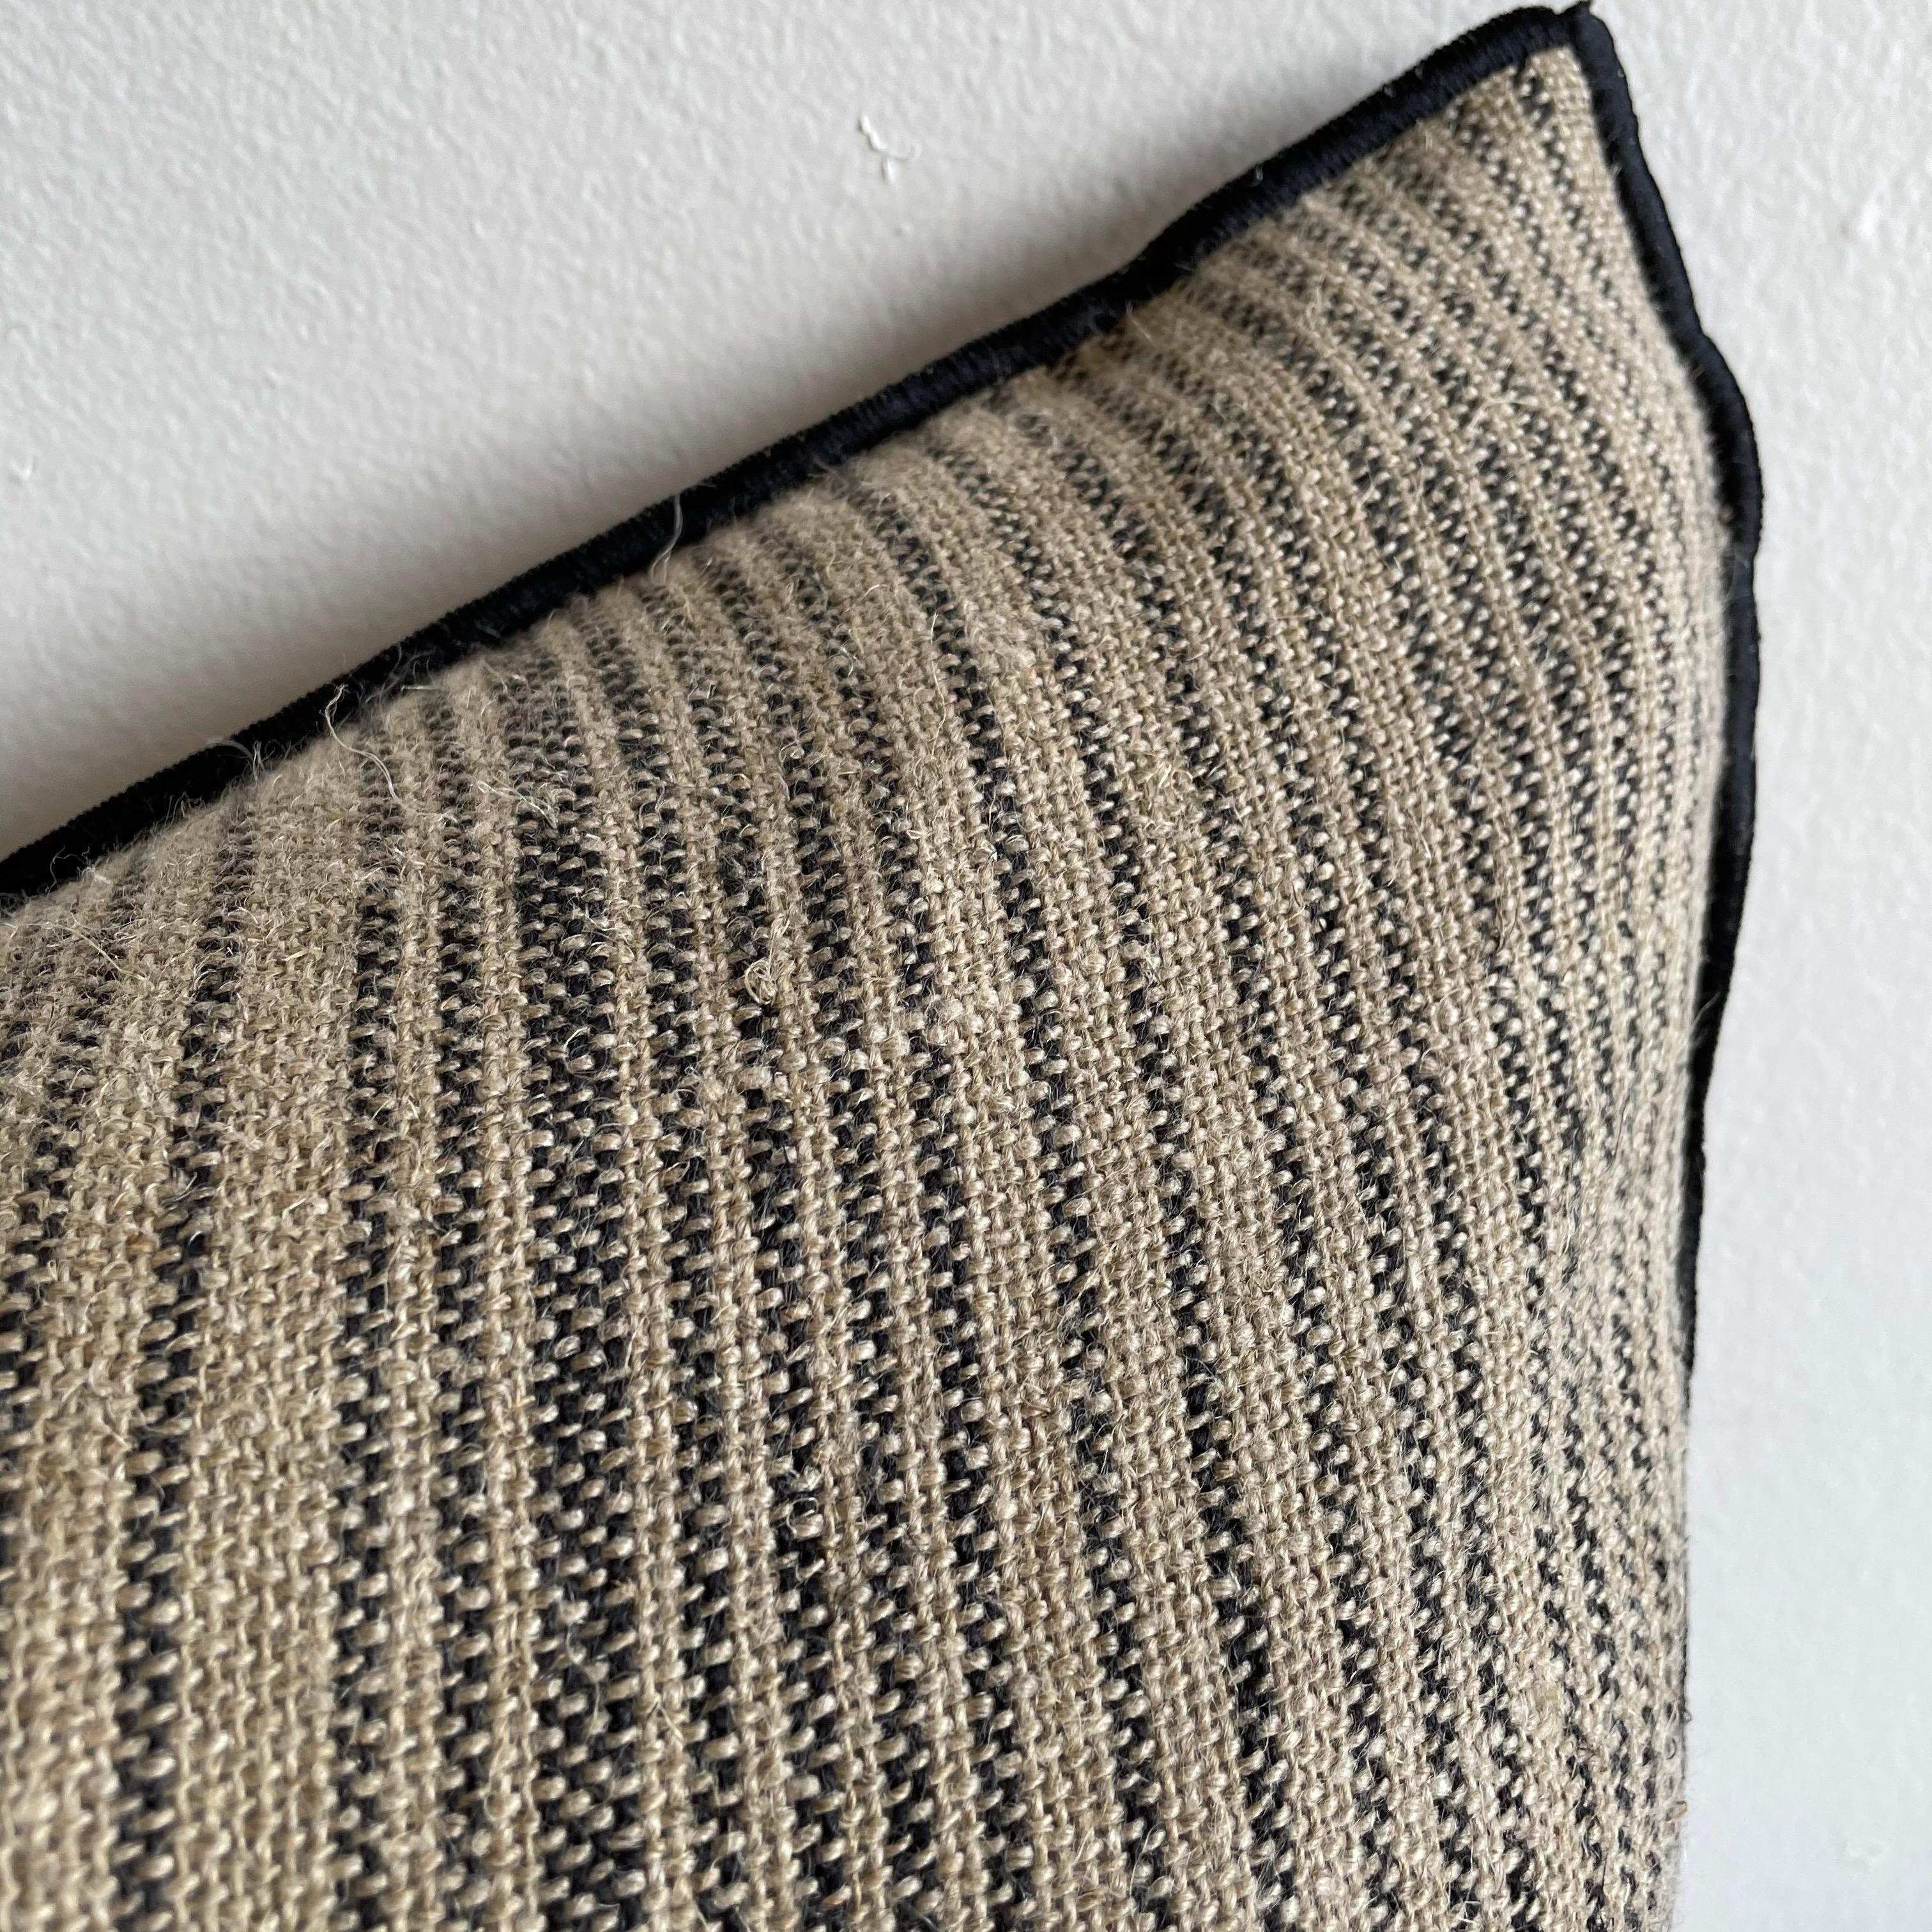 Custom flax linen with black ticking stripe lumbar pillow
Size: 15 x 23
 Thick soft, nubby textured style pillow with a stitched edge, metal zipper closure. Our pillows are constructed with vintage one of a kind textiles from around the globe.